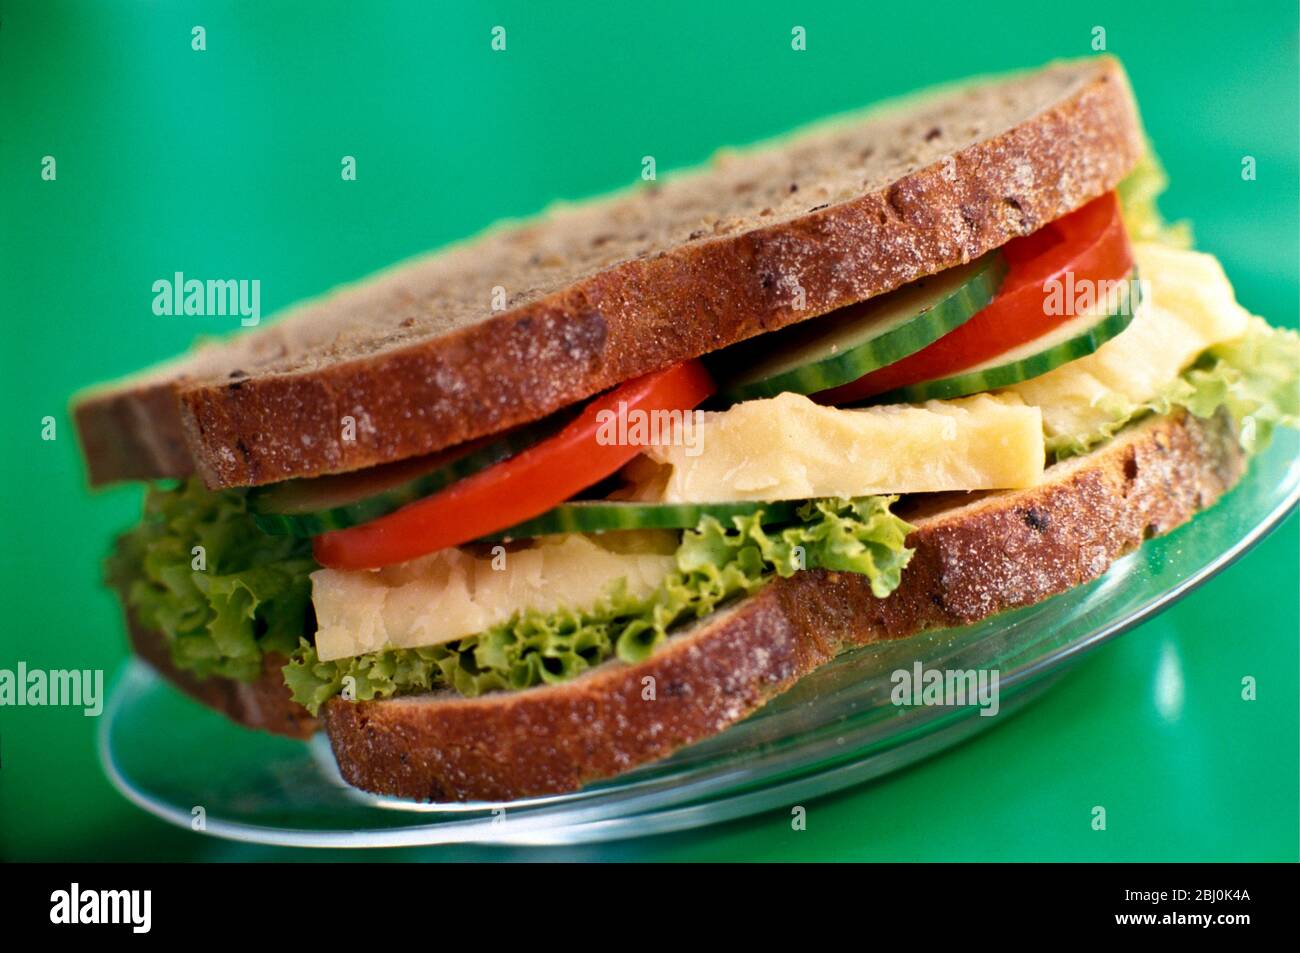 Cheese tomato, cucumber and lettuce sandwich on brown wholemeal bread, on glass plate on bright green background - Stock Photo